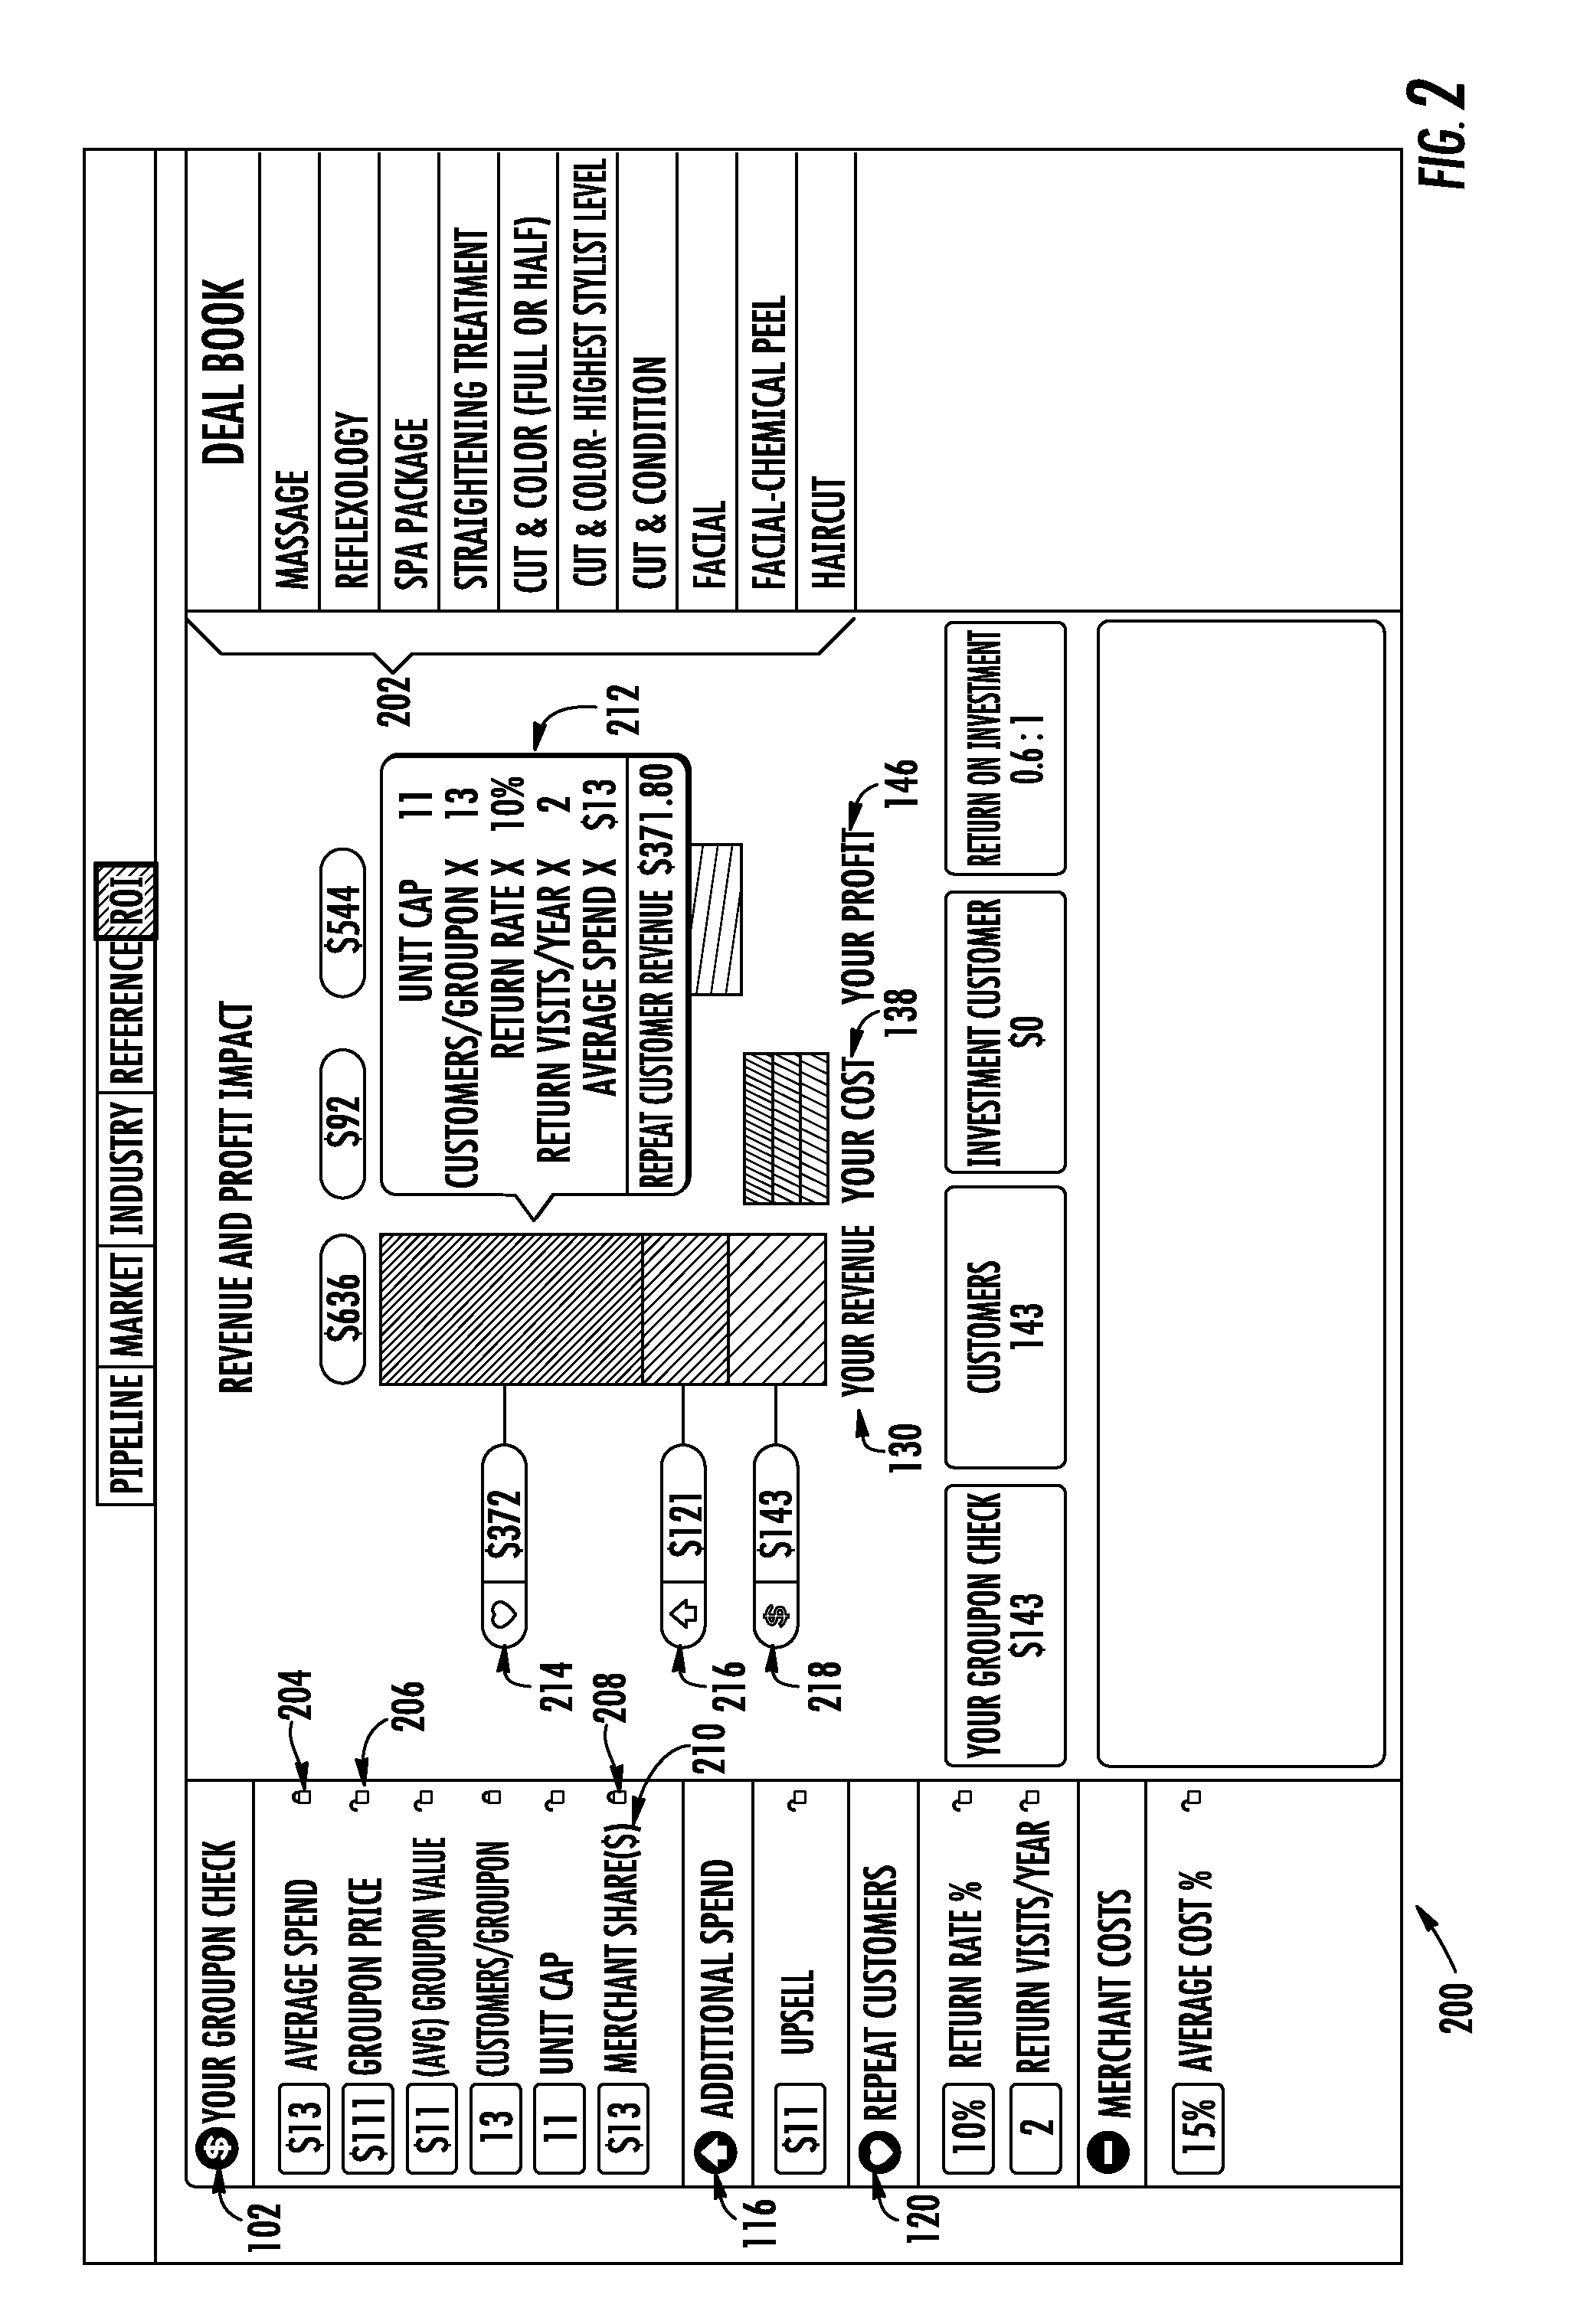 Method And Apparatus For Payment, Return On Investment, And Impact Reporting